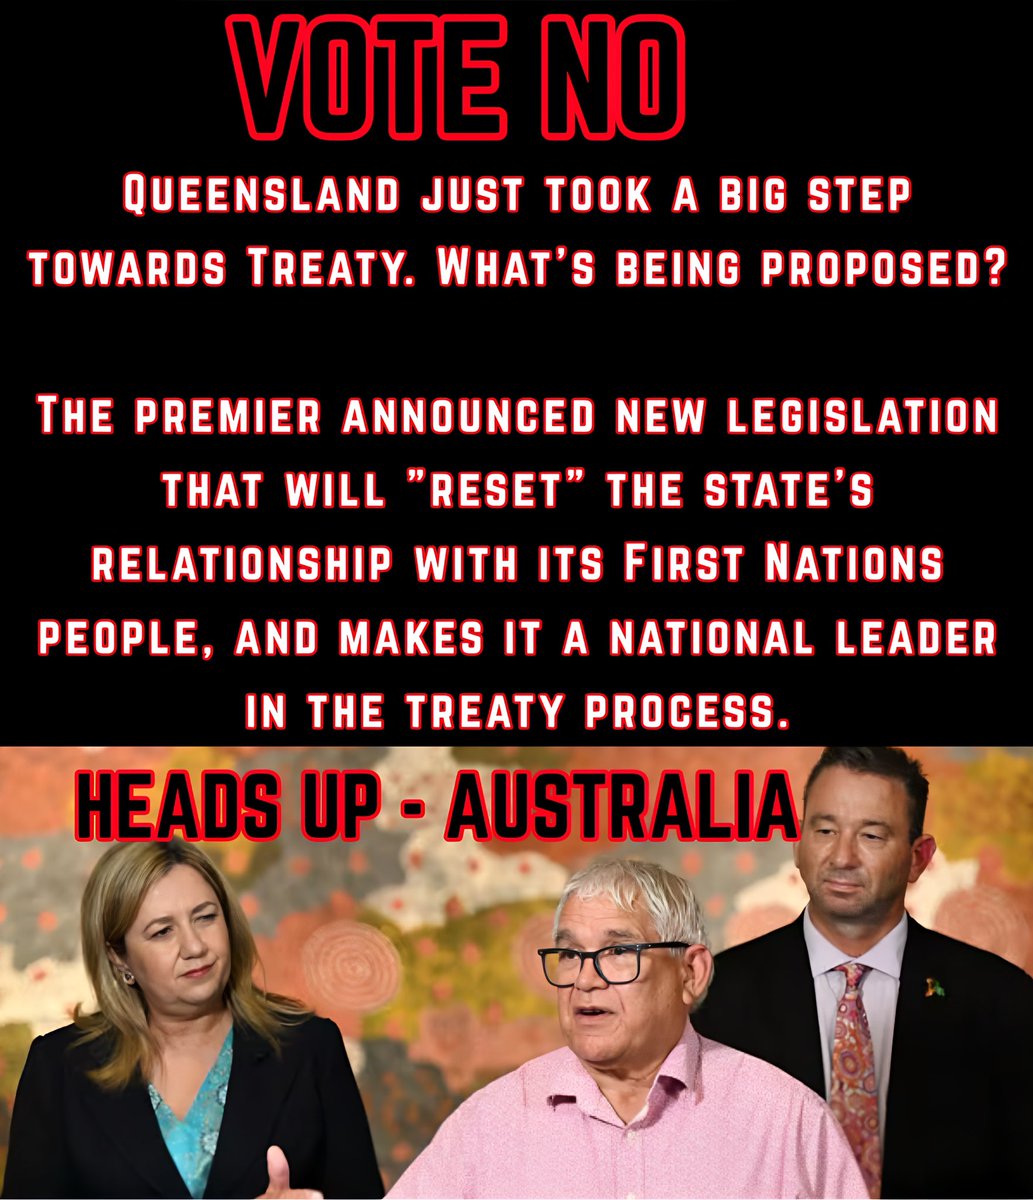 VOTE NO - AUSTRALIA 🔥🎯 NEVER LABOR 🎯 In announcing the legislation, the premier pointed to treaty processes overseas, and Australia's lag in establishing similar processes. “Treaties have been established over centuries” ⬇️⬇️⬇️ sbs.com.au/nitv/article/q…